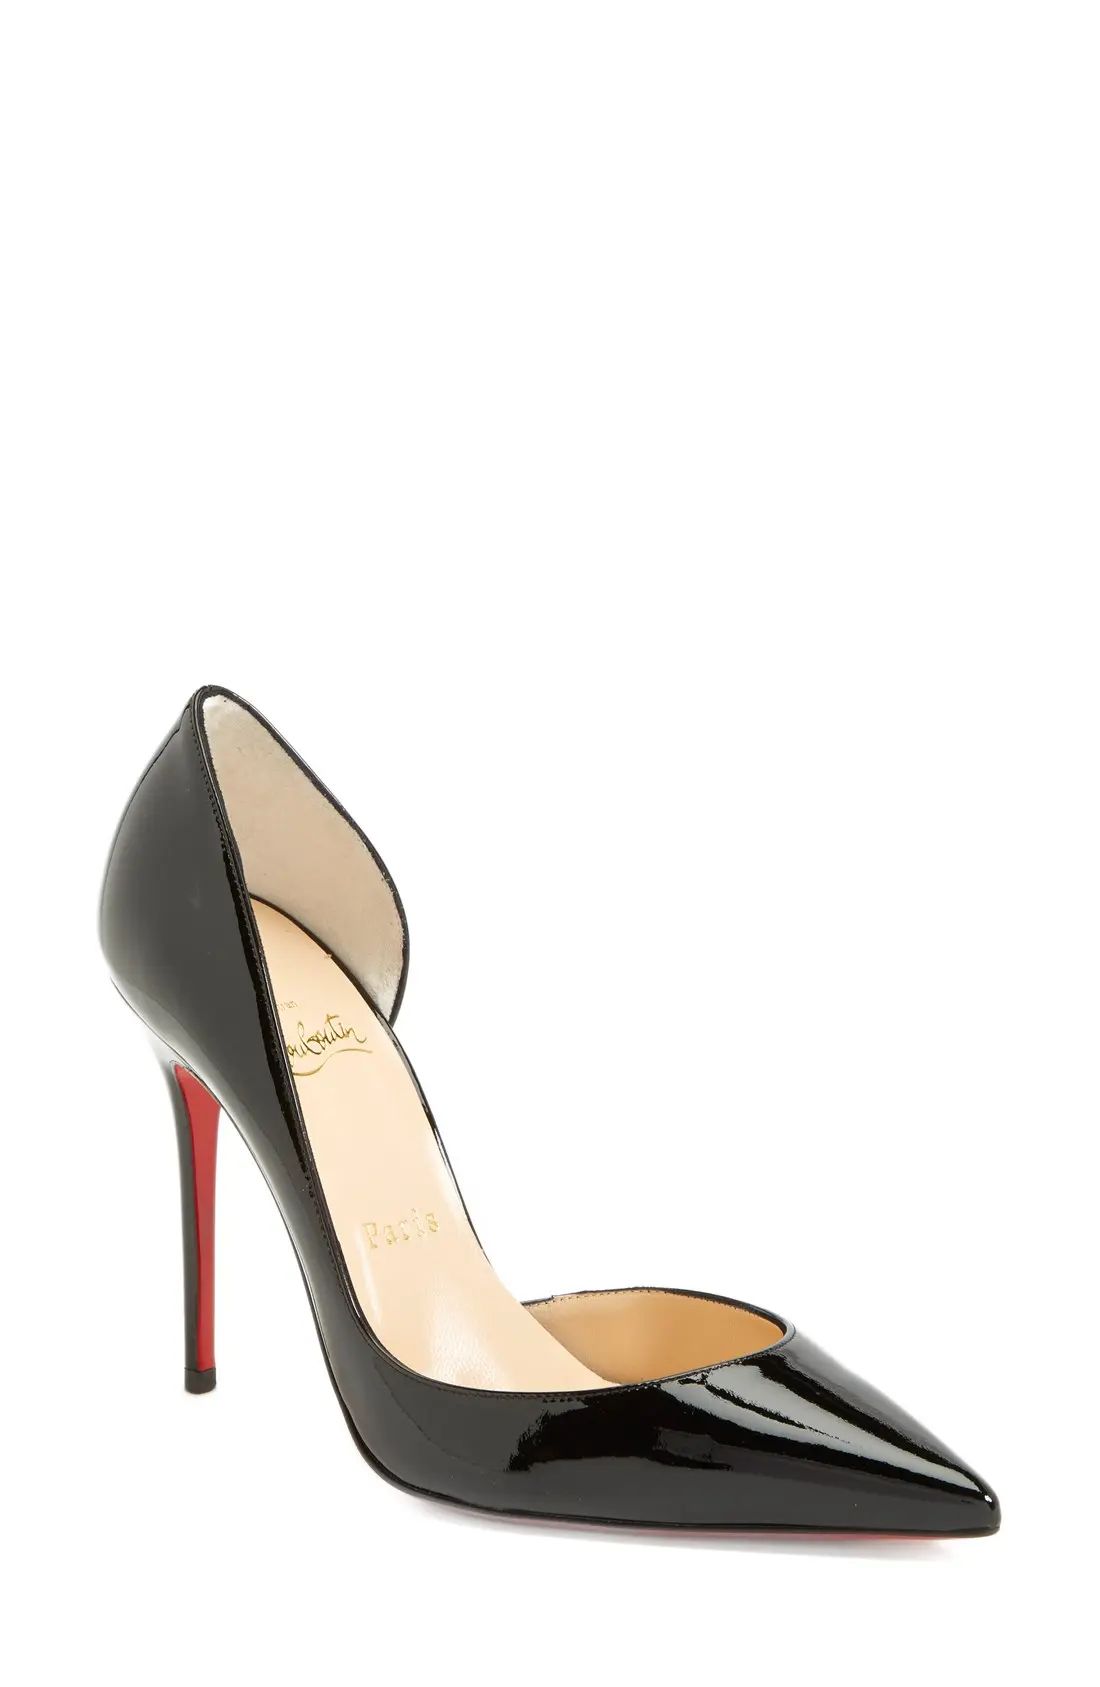 Christian Louboutin 'Iriza' Pointy Toe Half d'Orsay Pump, Size 12Us in Black at Nordstrom | Nordstrom